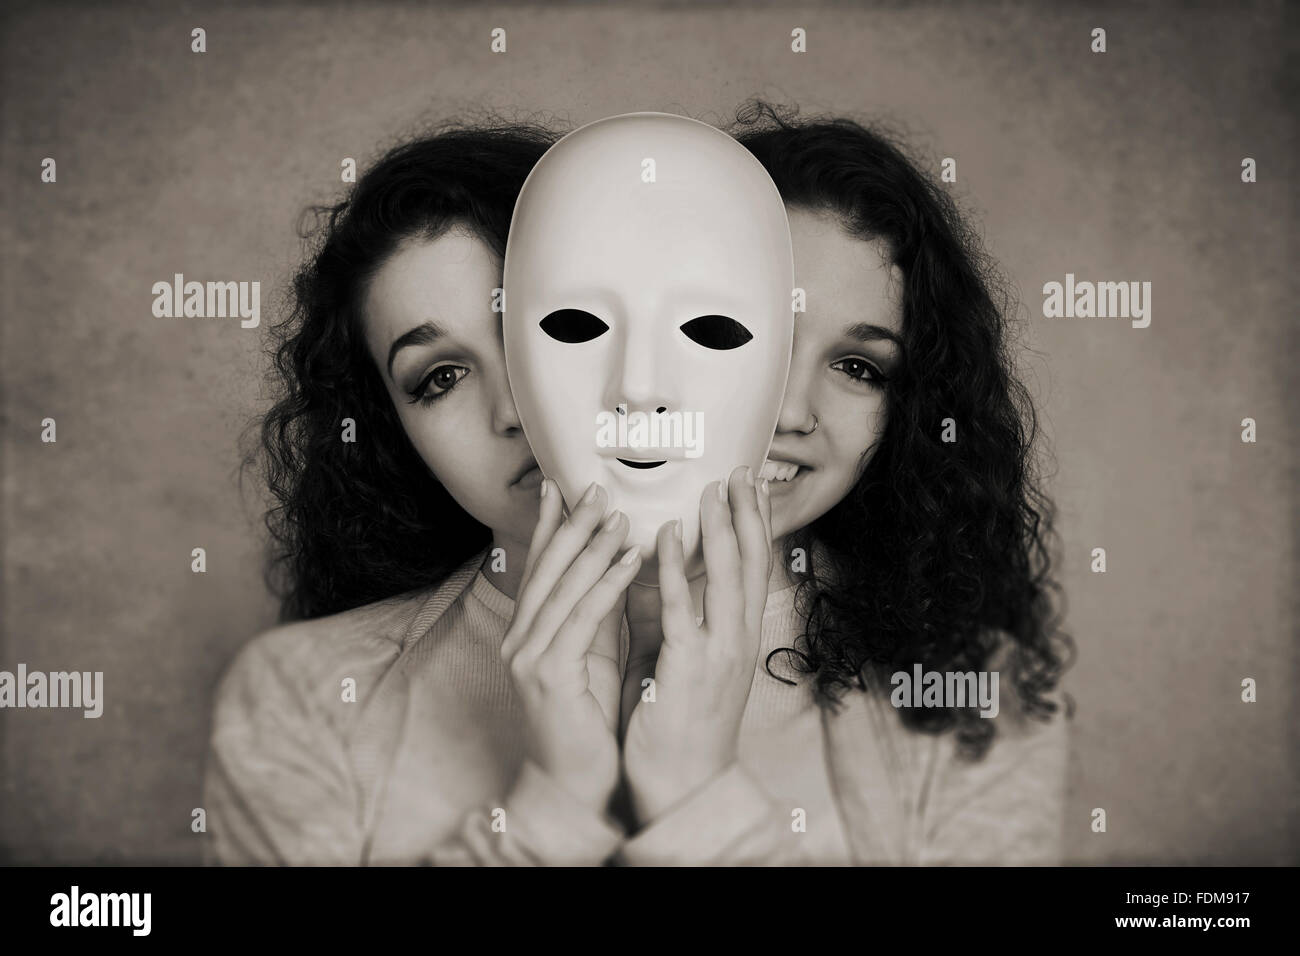 two-faced woman manic depression concept Stock Photo